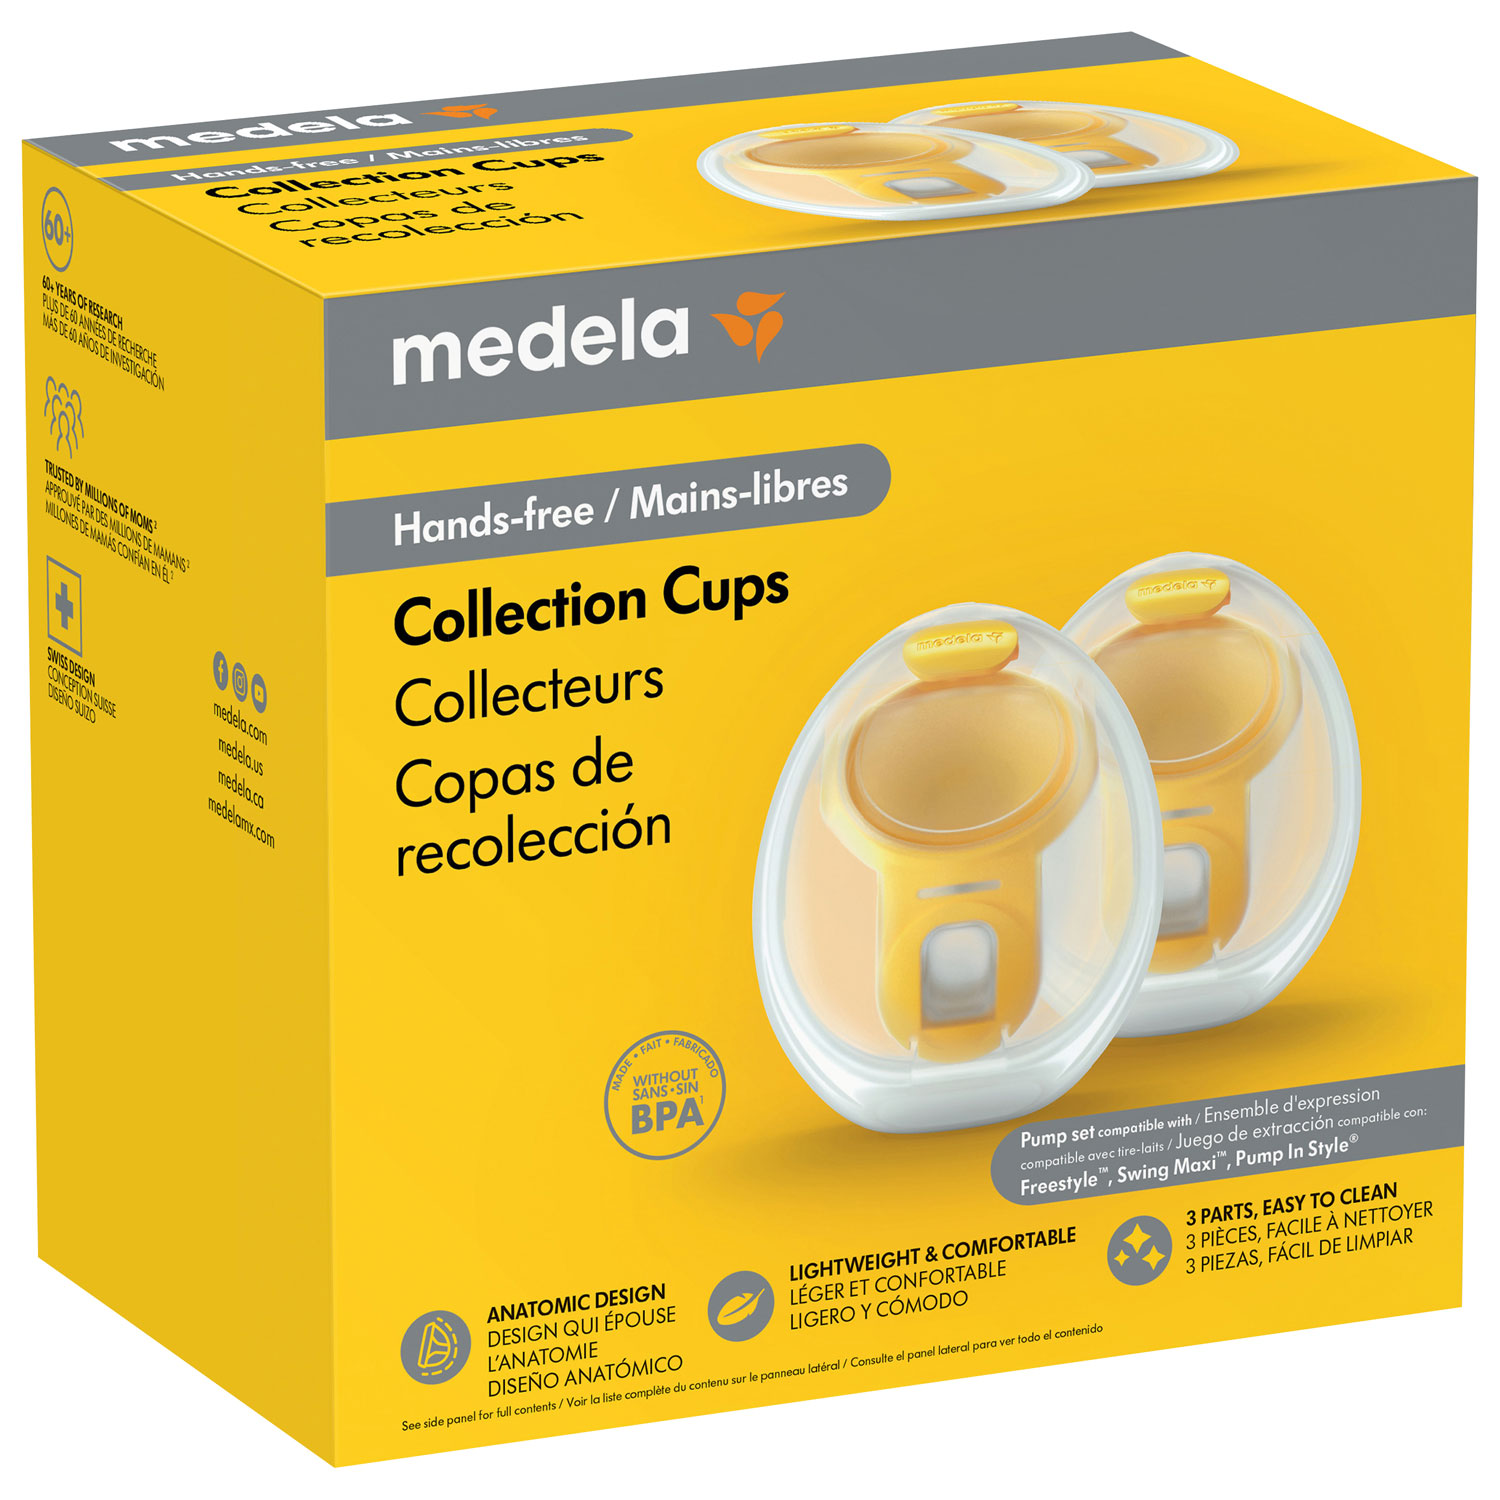 Medela Hands-free Collection Cups for Freestyle Flex, Pump in Style & Swing  Maxi Electric Breast Pumps